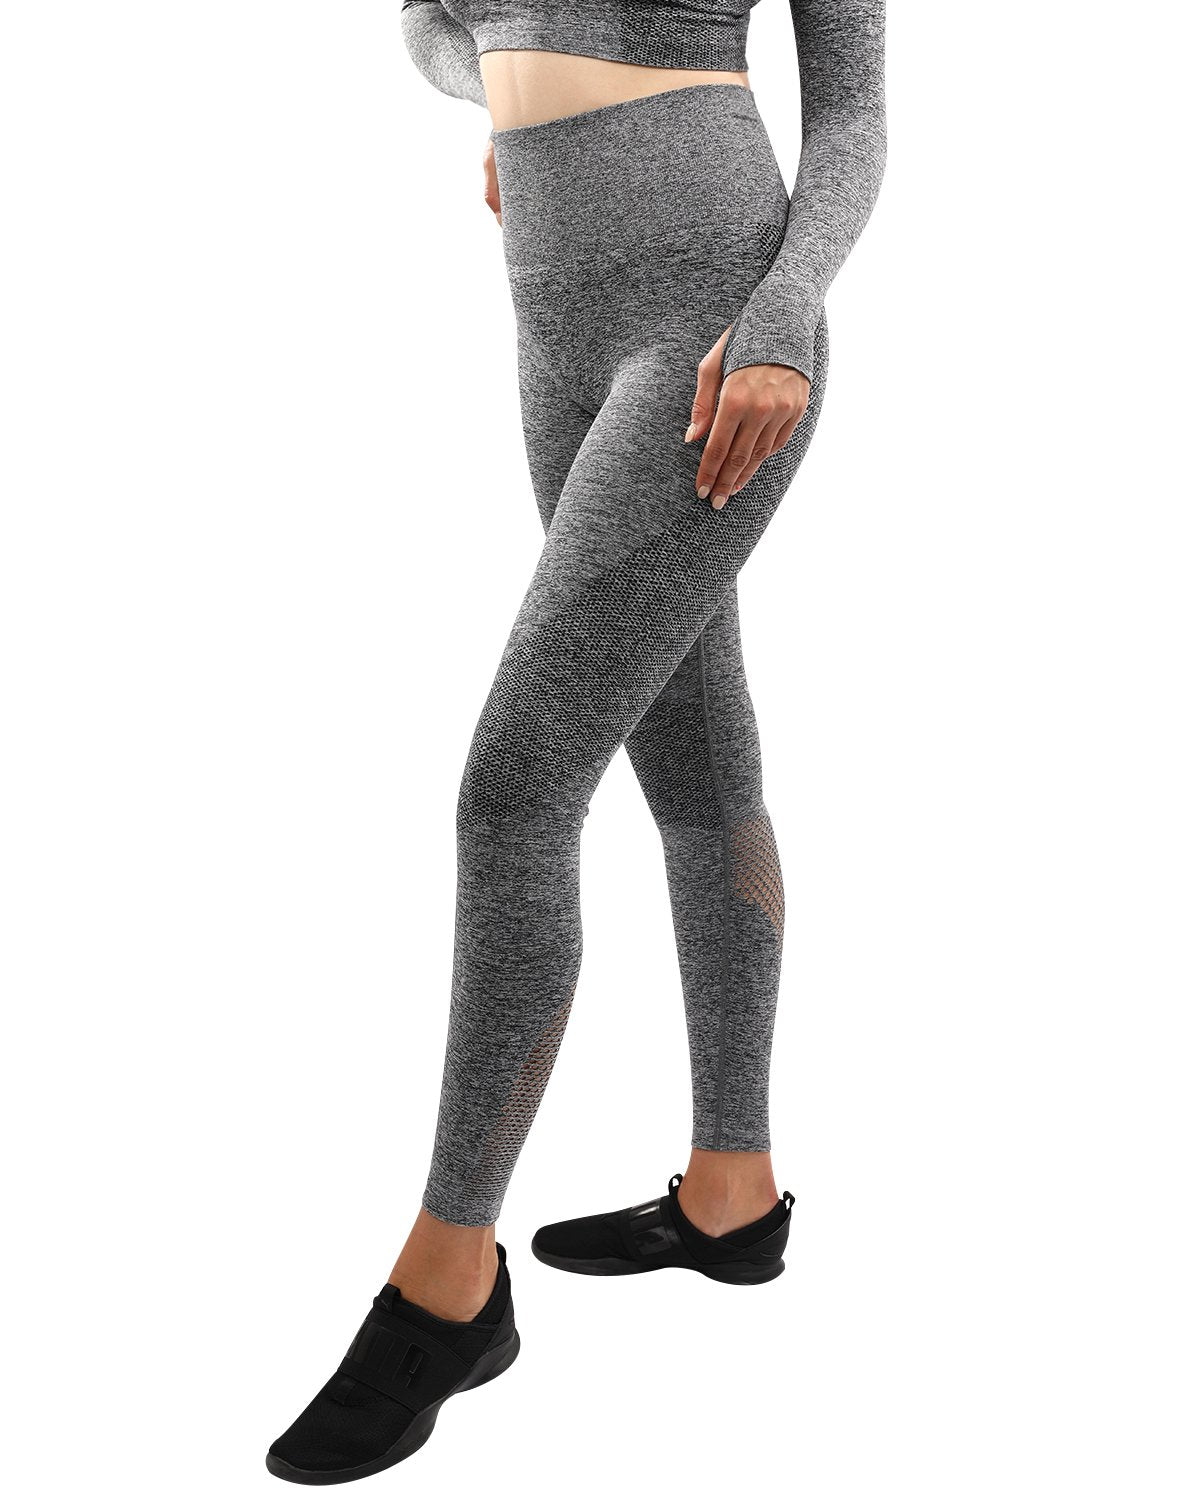 Cadrina Seamless Leggings & Sports Top Set - Grey  Comfy workout clothes,  Trendy workout outfits, Spring workout outfit